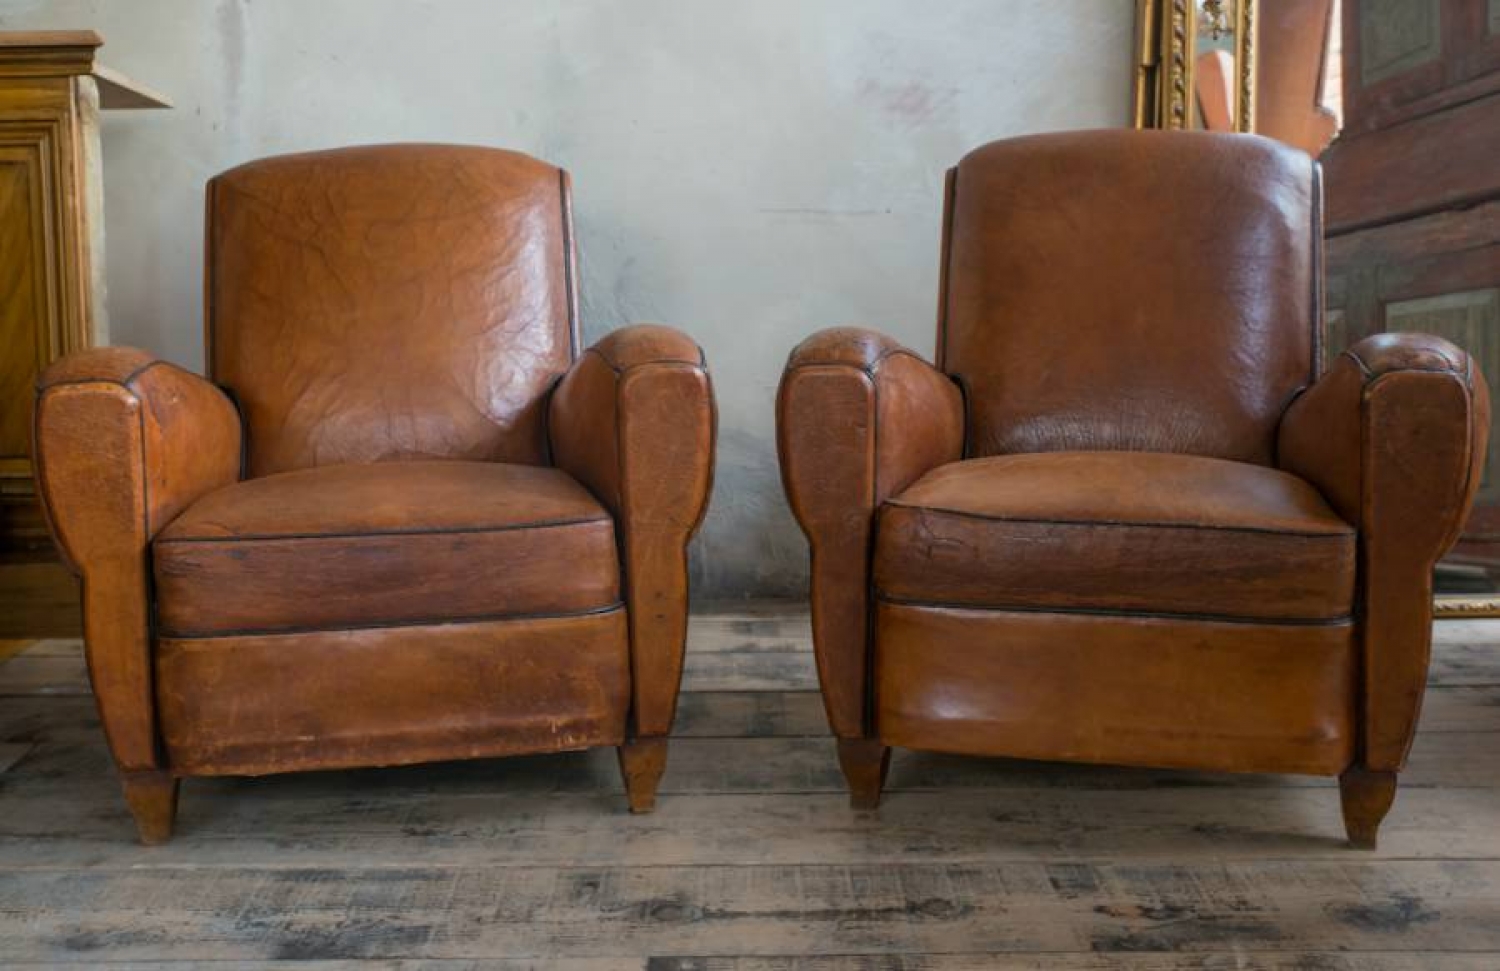 Charming Pair of French Club chairs c 1950